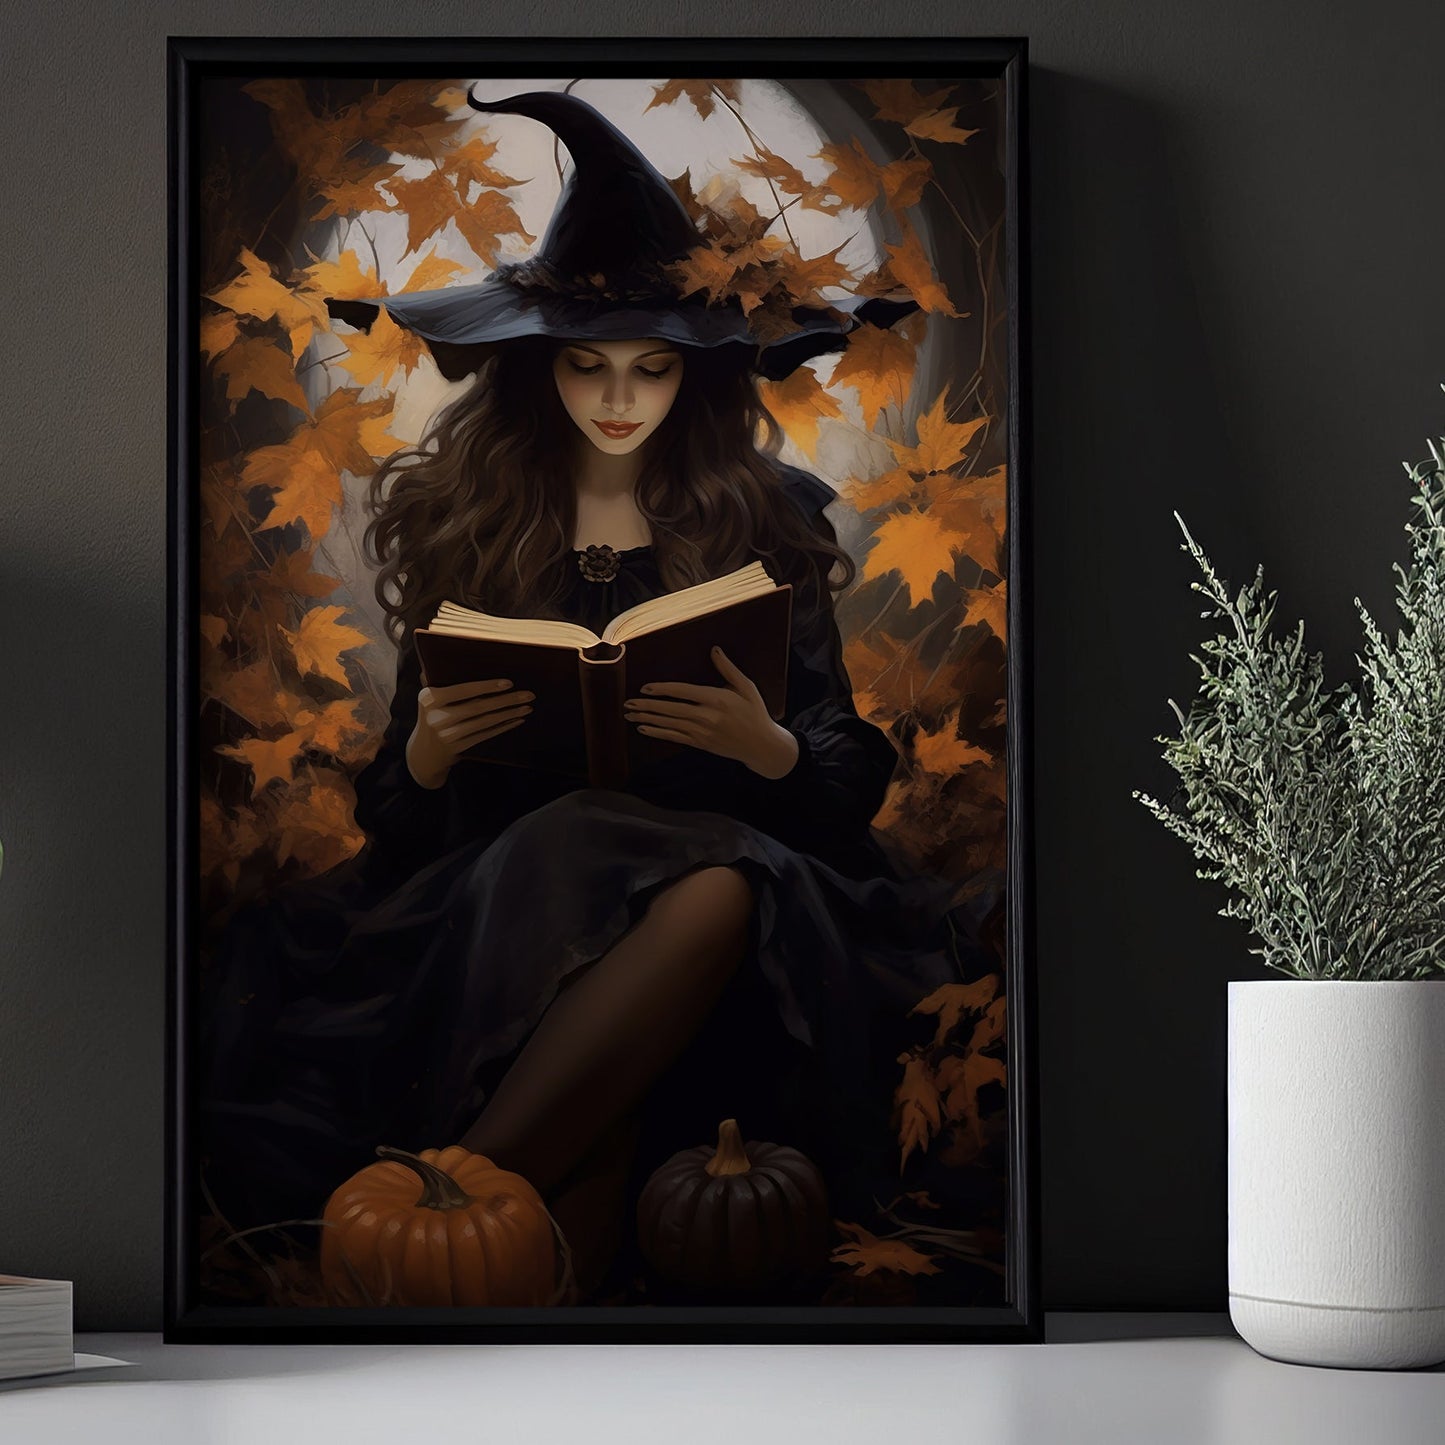 Spelling Witch Reading Book In Halloween Night Vintage Gothic Wall Art Print - Dark Academia Magic Witchy Halloween Wall Decor